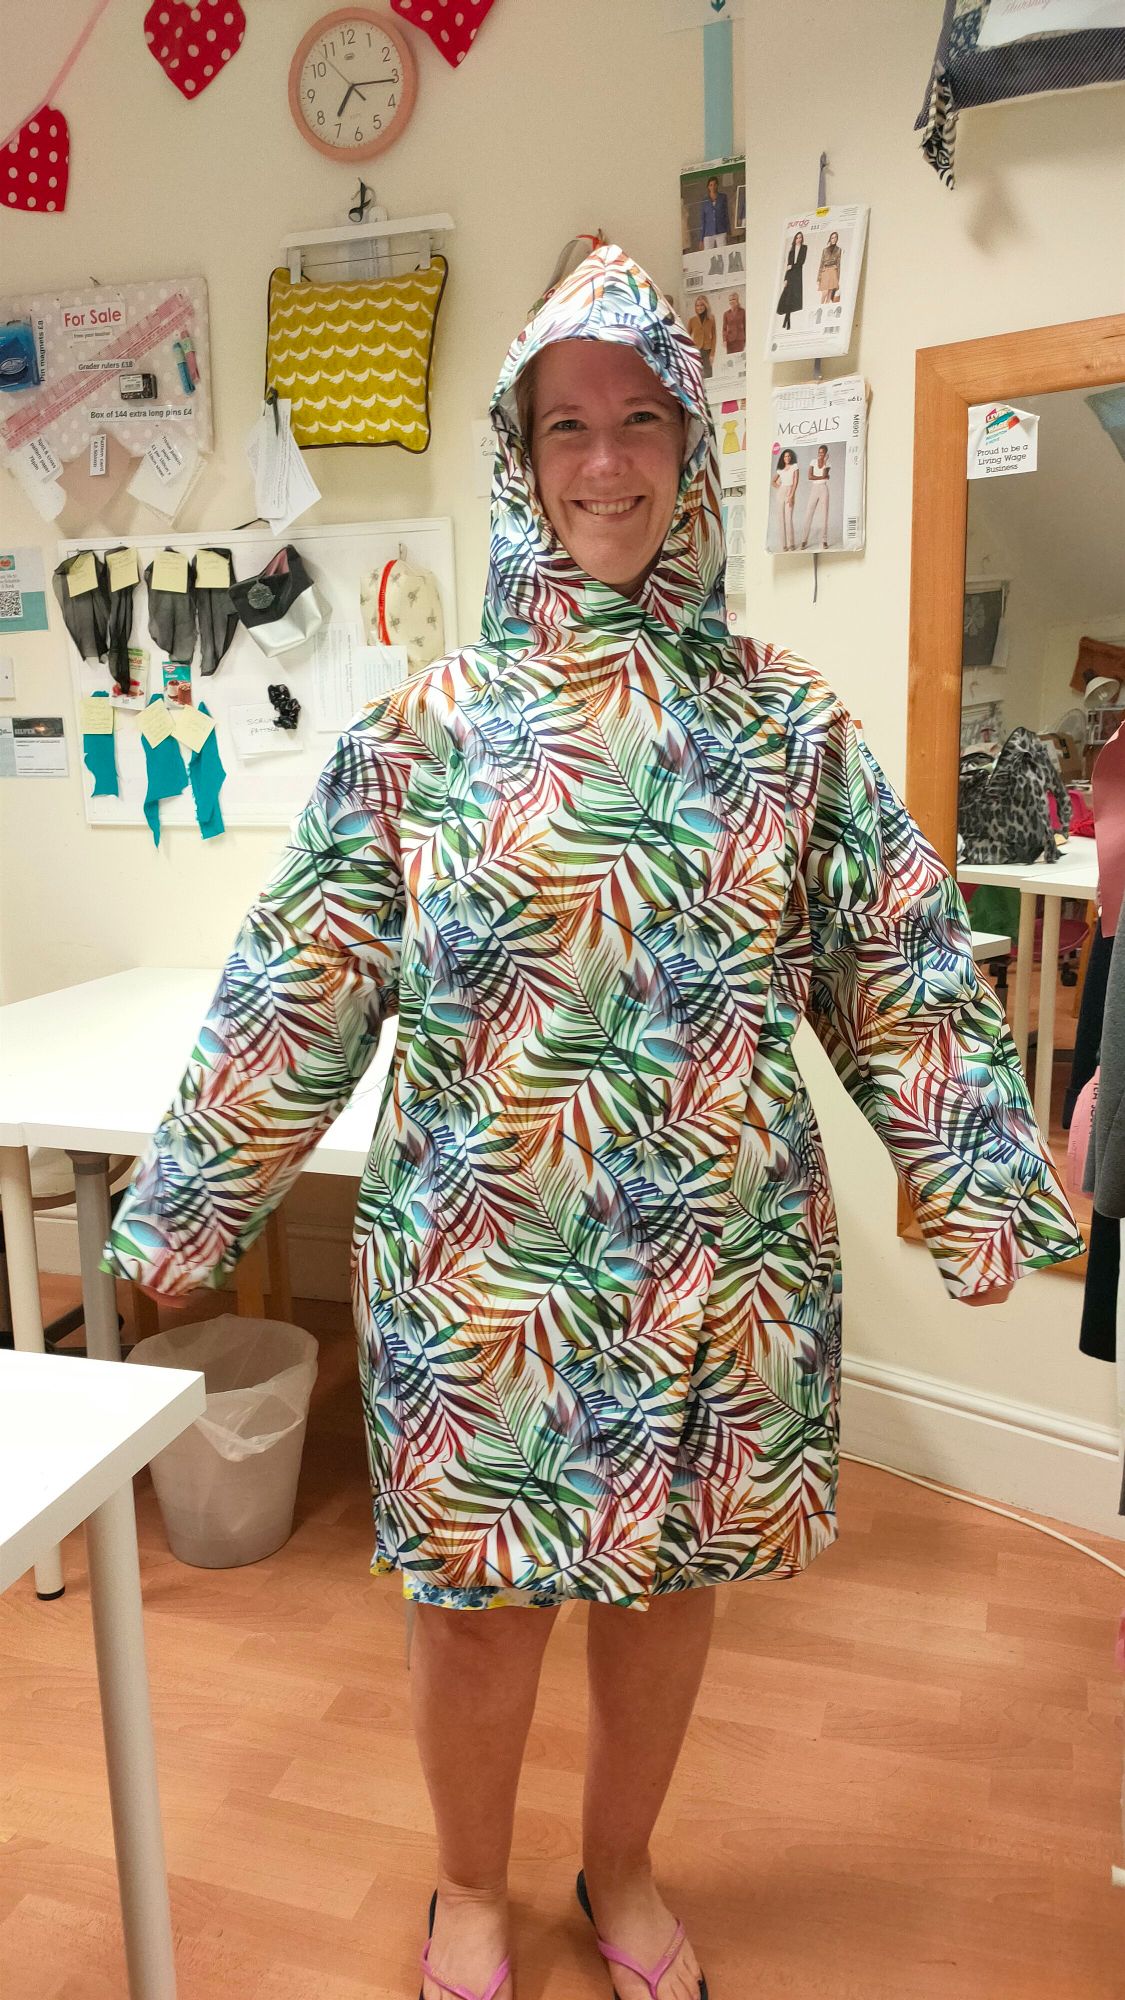 Raincoats sewn on our Sew A Raincoat workshop - Sew In Brighton Sewing School, East Sussex